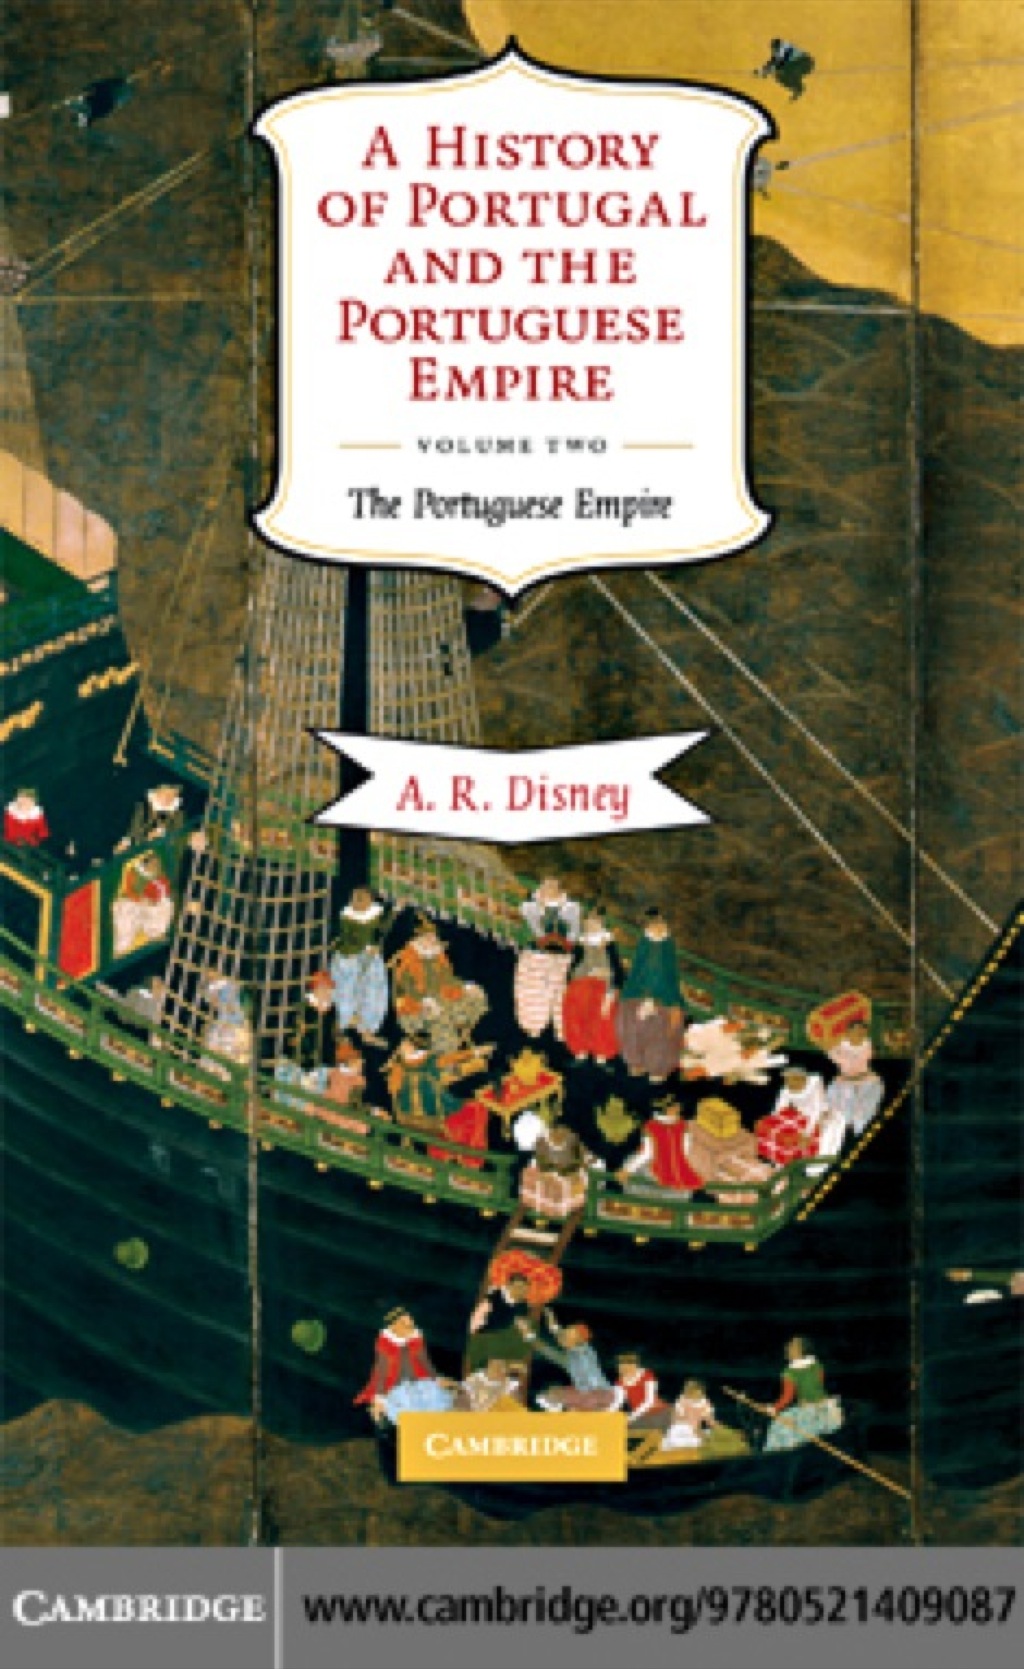 A History of Portugal and the Portuguese Empire: Volume 2  The Portuguese Empire (eBook) - A. R. Disney